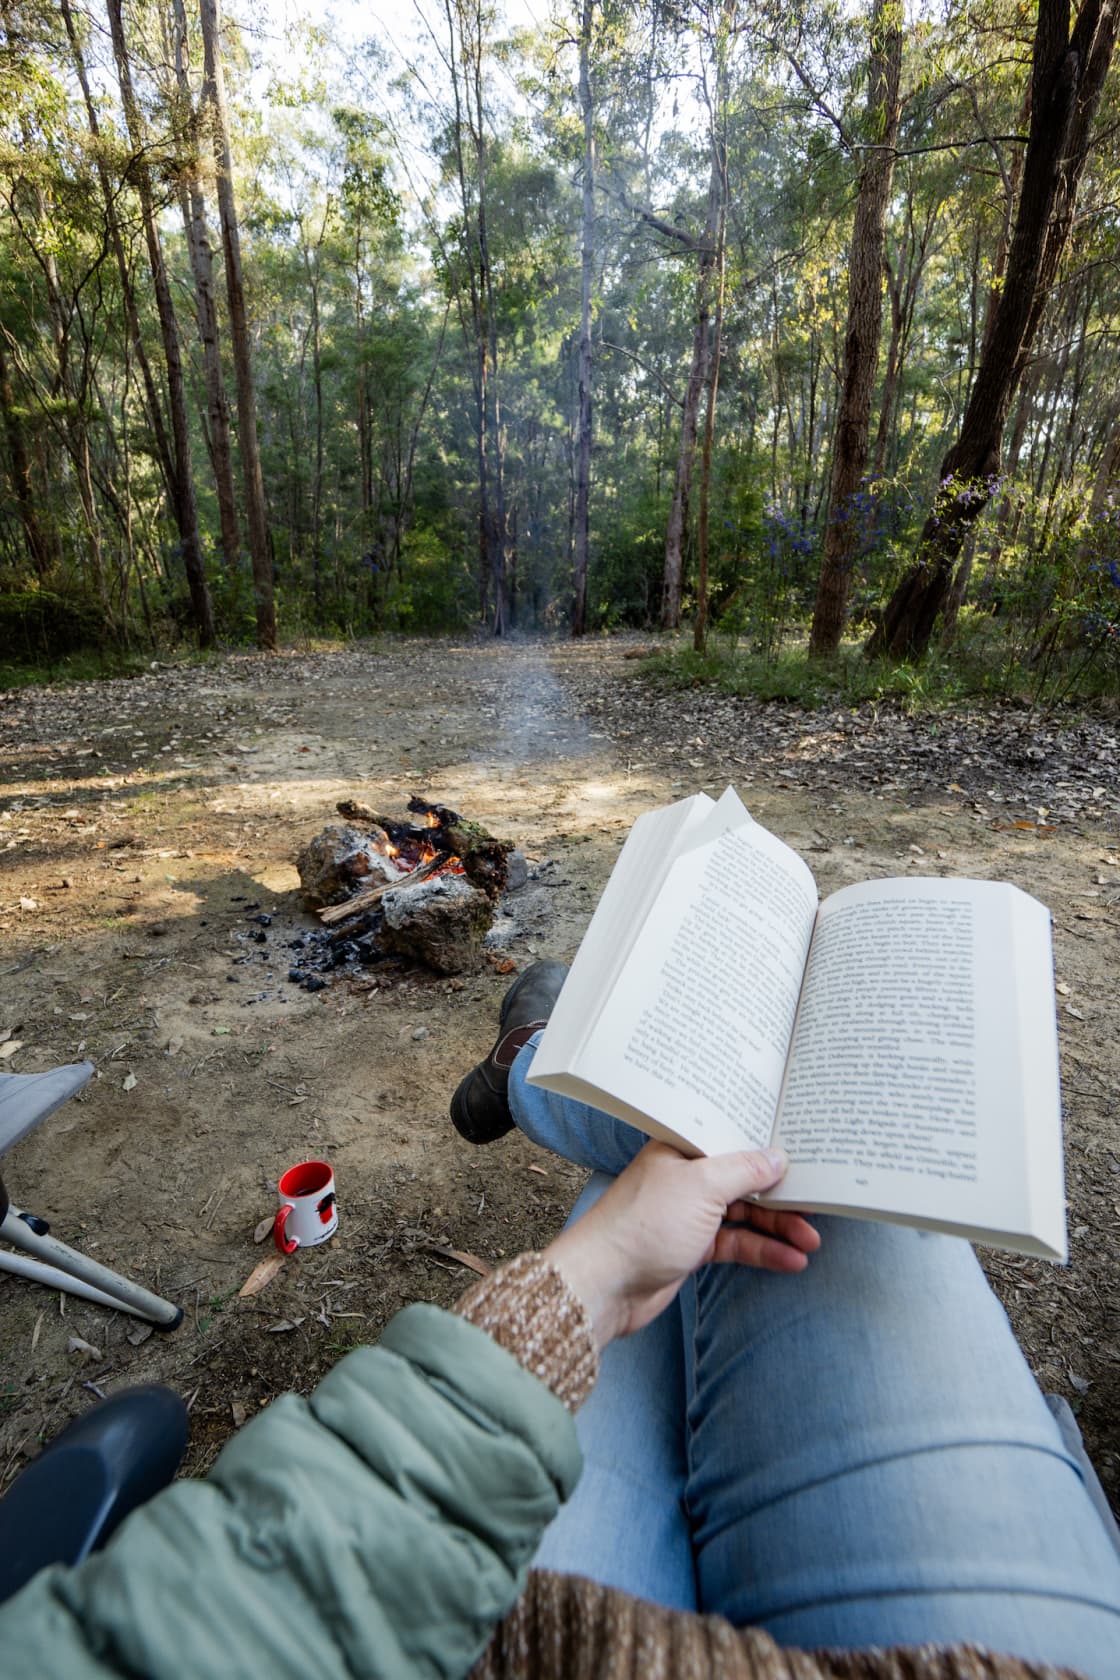 Reading by the campfire in the morning